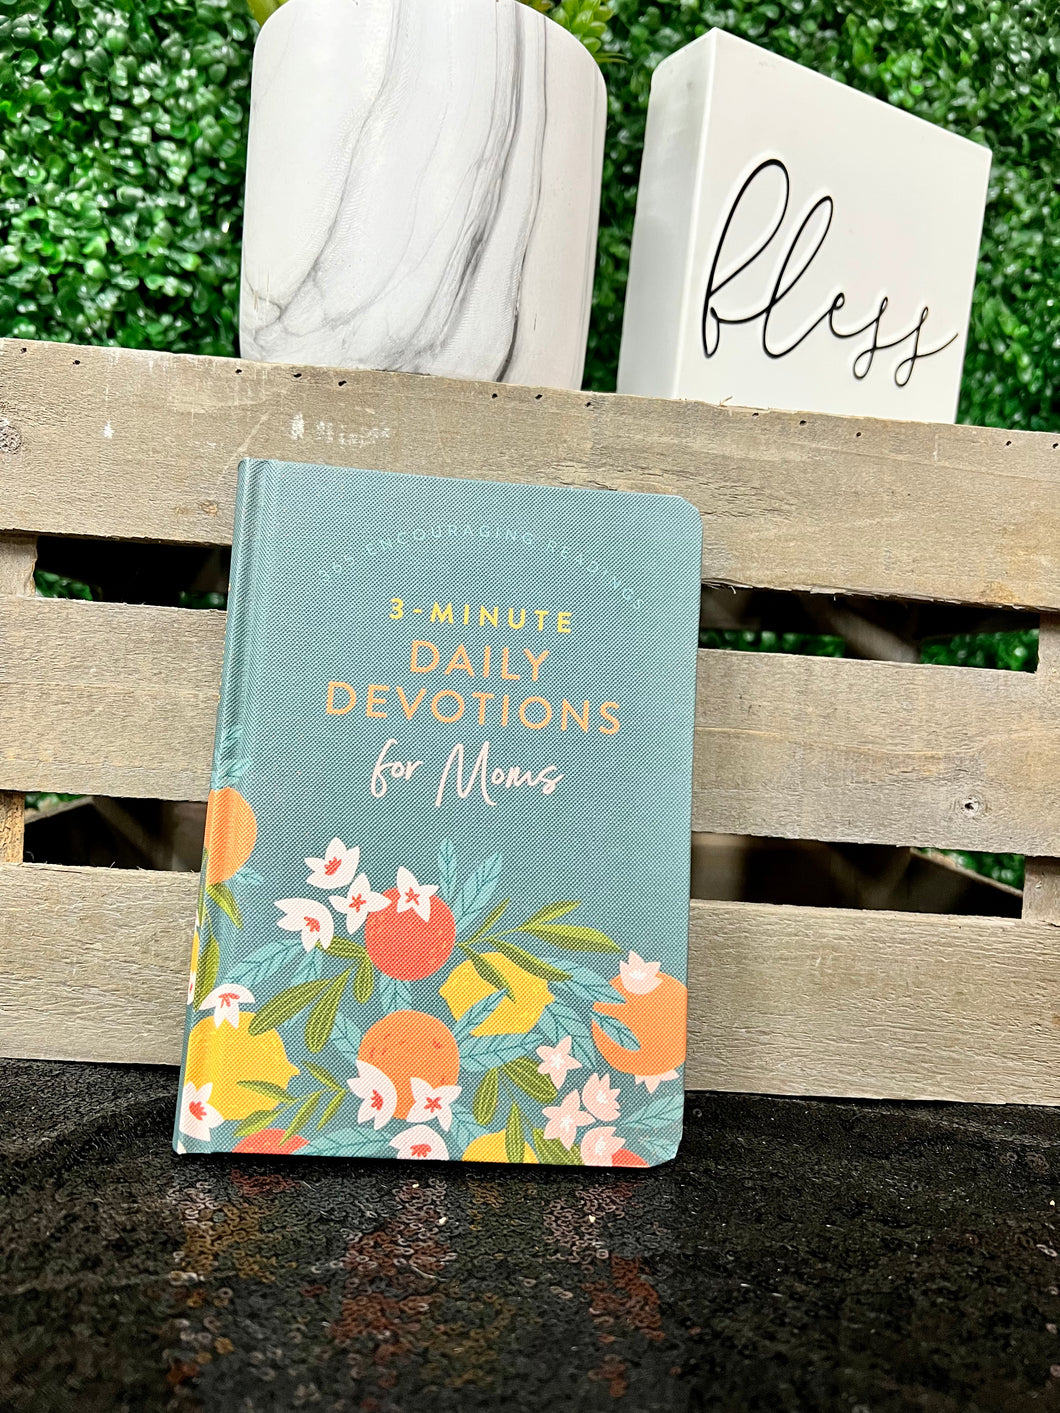 3-Minute Daily Devotions For Moms